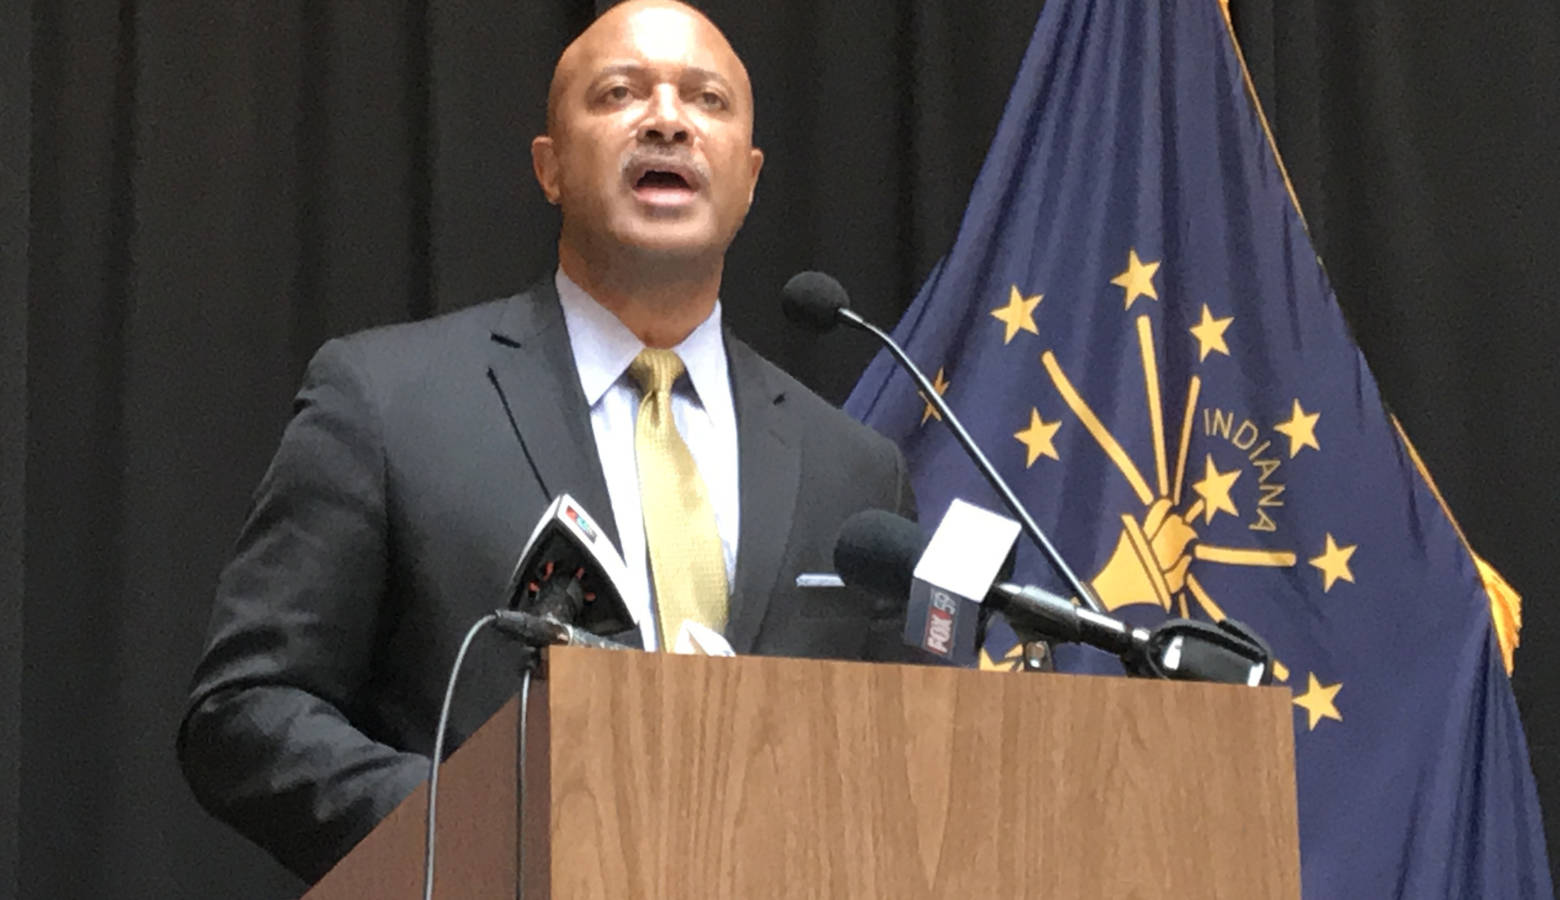 Attorney General Curtis Hill says he wants to help people feel safe and comfortable in their communities. Some women say they don't feel safe and comfortable with him in office. (Brandon Smith/IPB News)